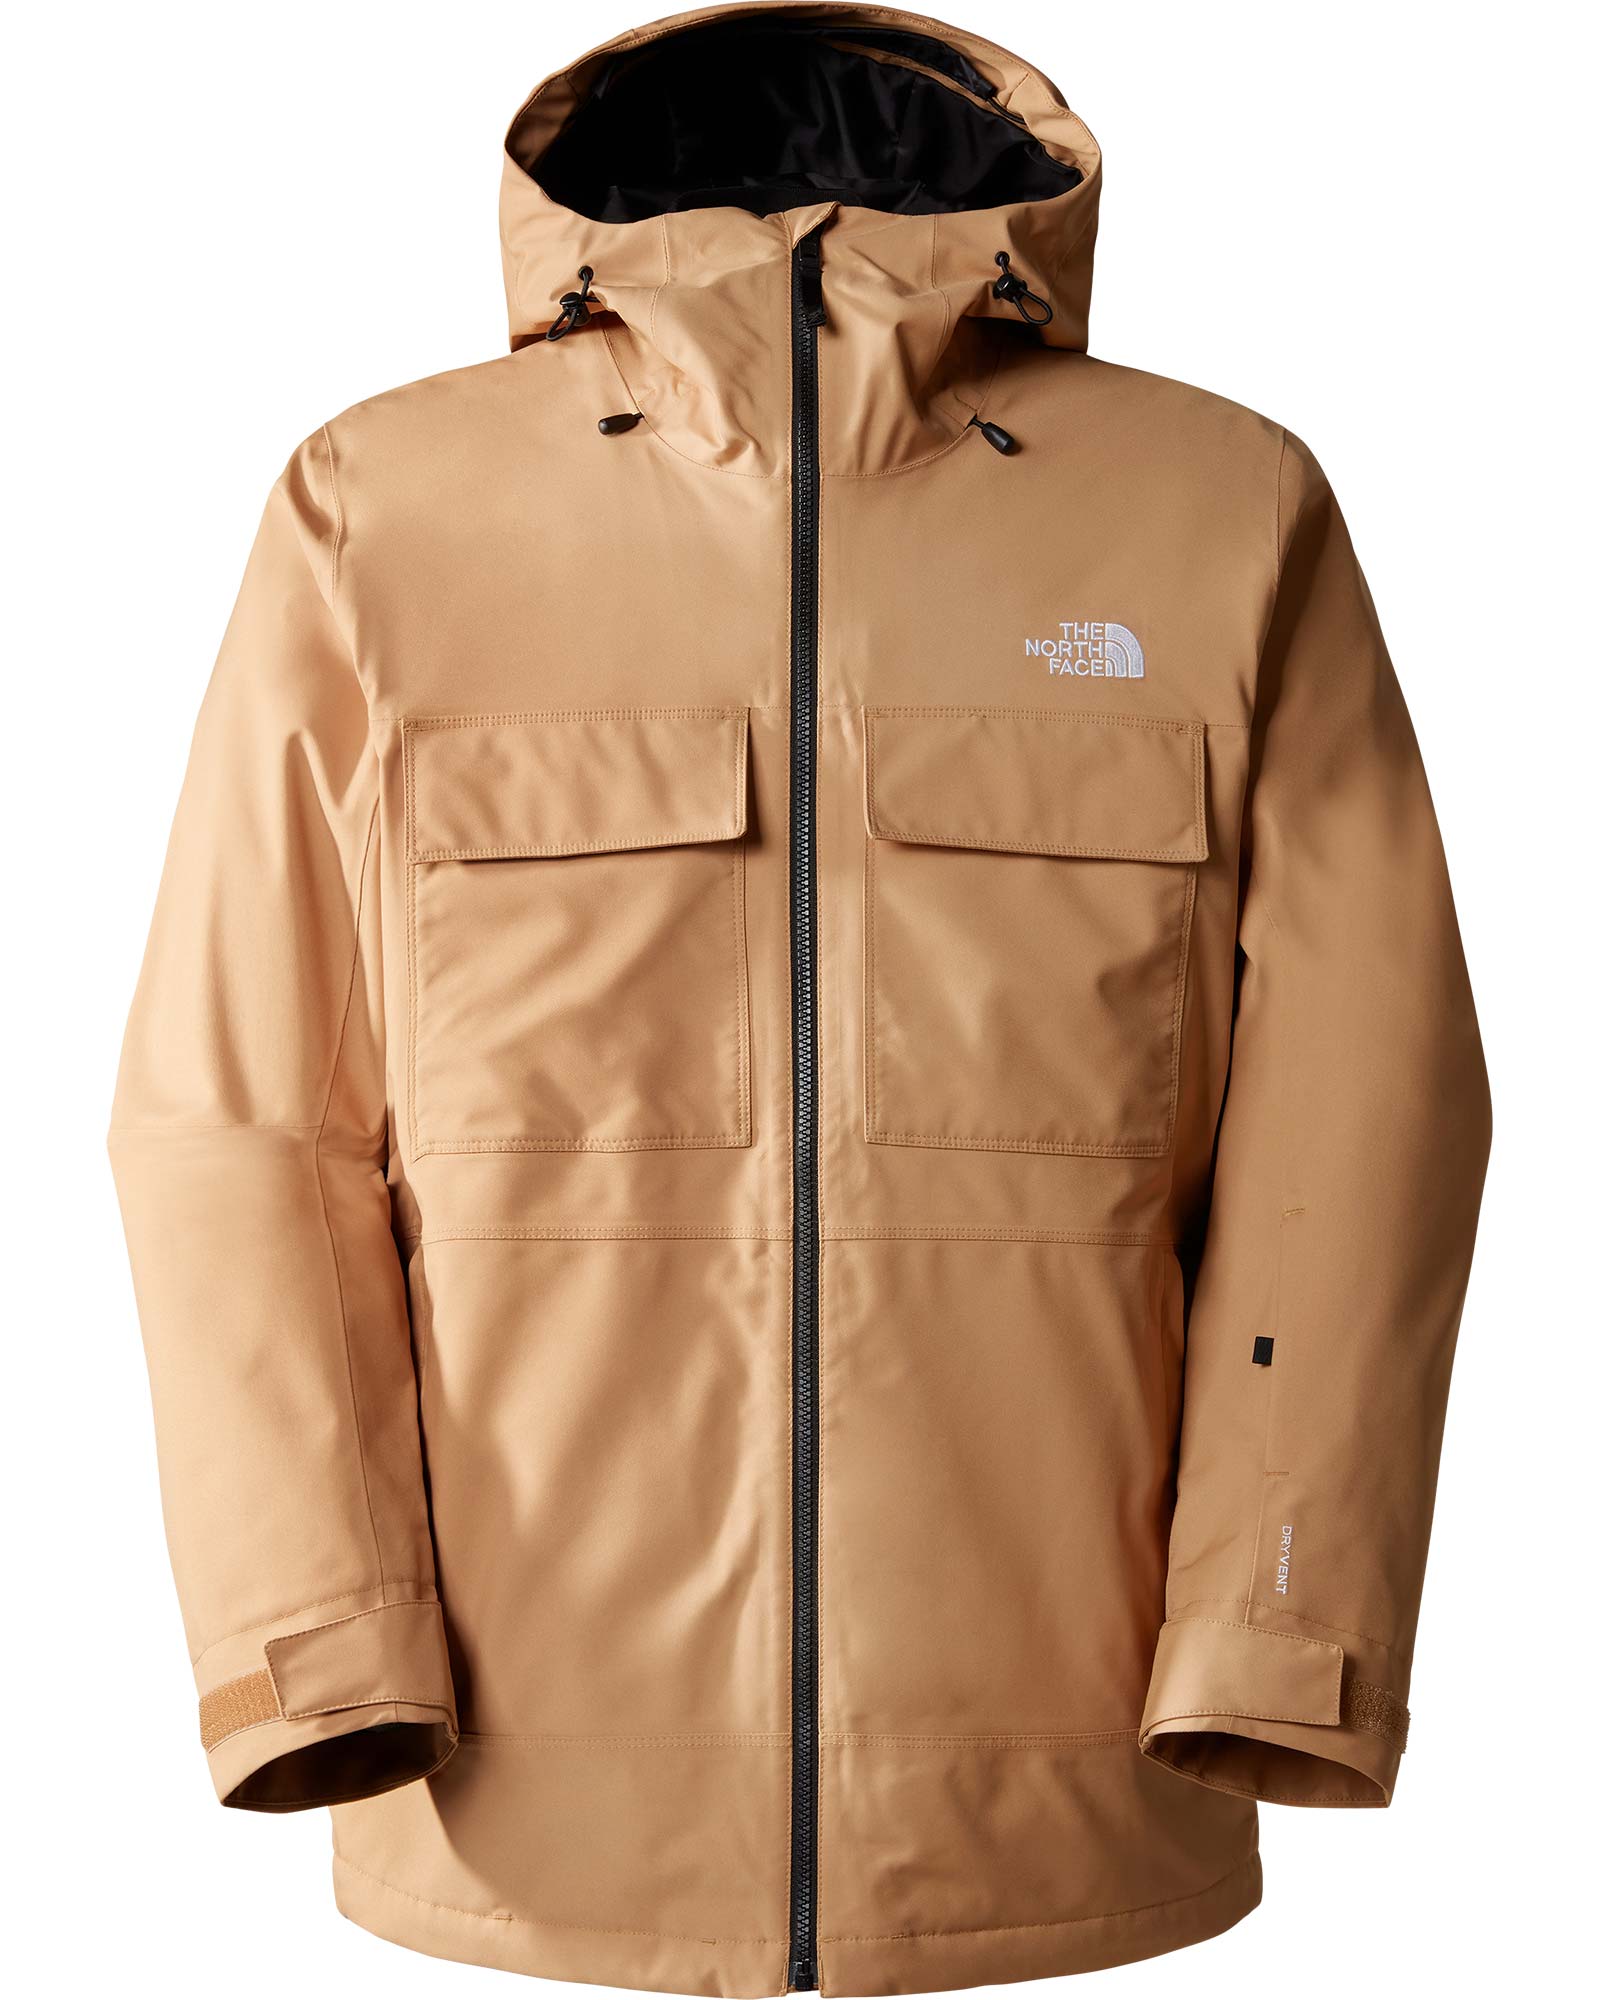 The North Face Men’s Fourbarrel Triclimate Jacket - Almond Butter/TNF Black L